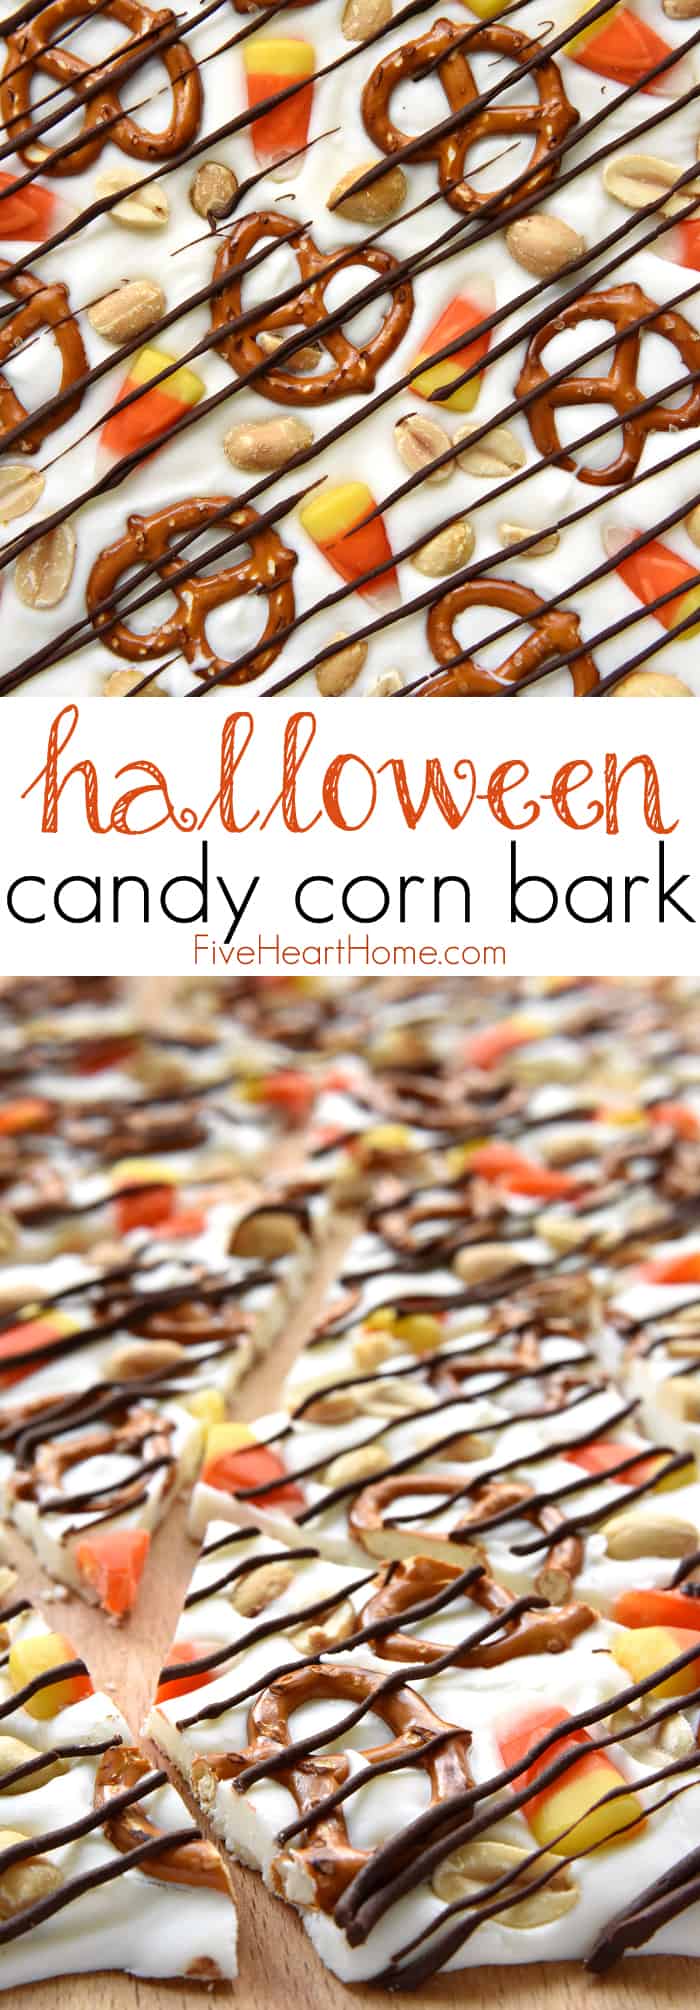 Halloween Bark ~ this sweet and salty candy corn recipe features white chocolate studded with candy corn, pretzels, and peanuts, then drizzled with semisweet chocolate for a fun and tasty Halloween treat! | FiveHeartHome.com via @fivehearthome